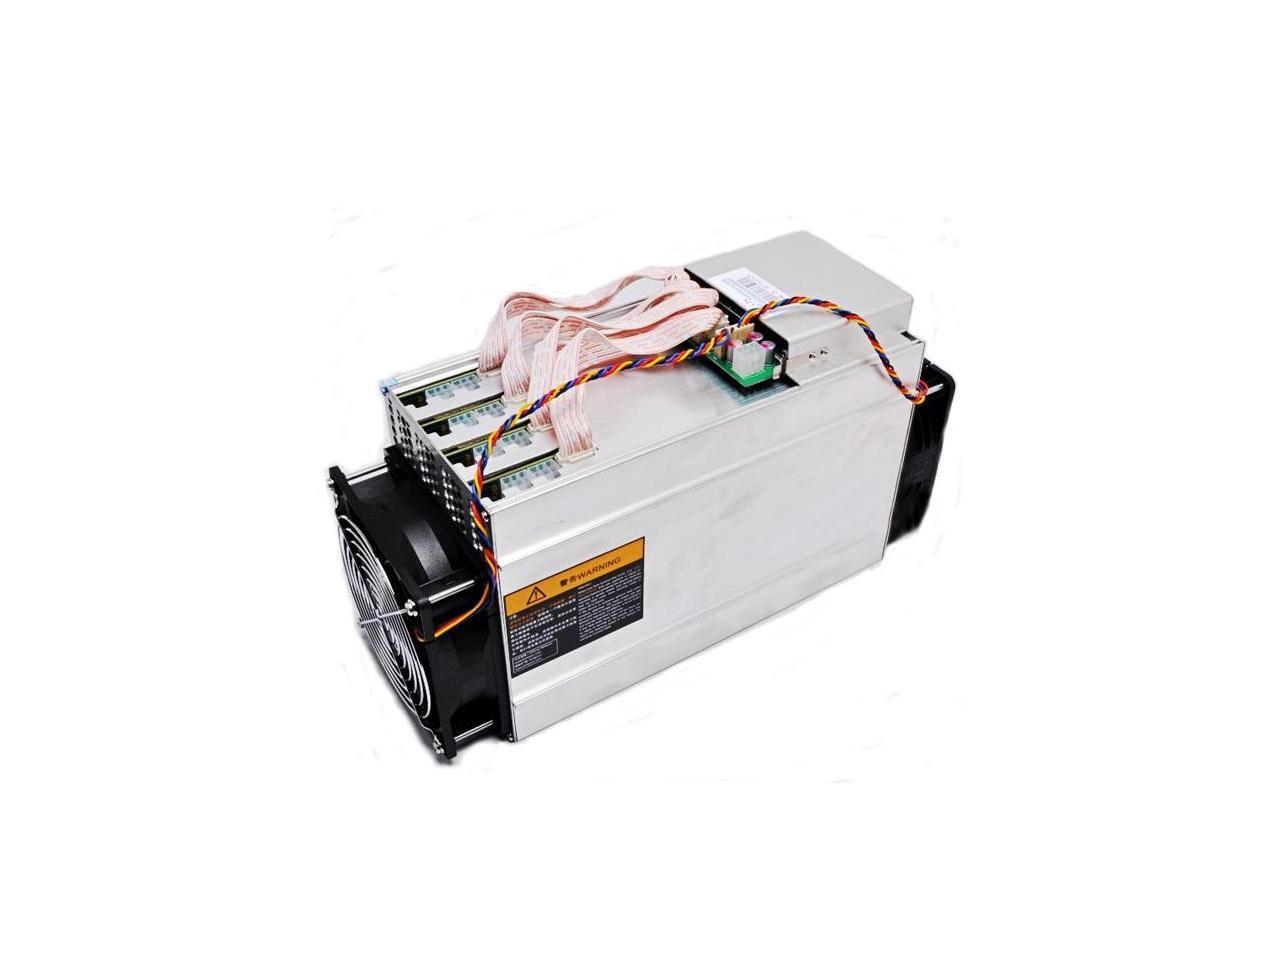 BITMAIN ANTMINER L3++( With power supply )Scrypt Litecoin Miner 580MH/s LTC  Come with Doge Coin Mining Machine ASIC Blockchain Miners Better Than  ANTMINER L3 L3+ S9 S9i 